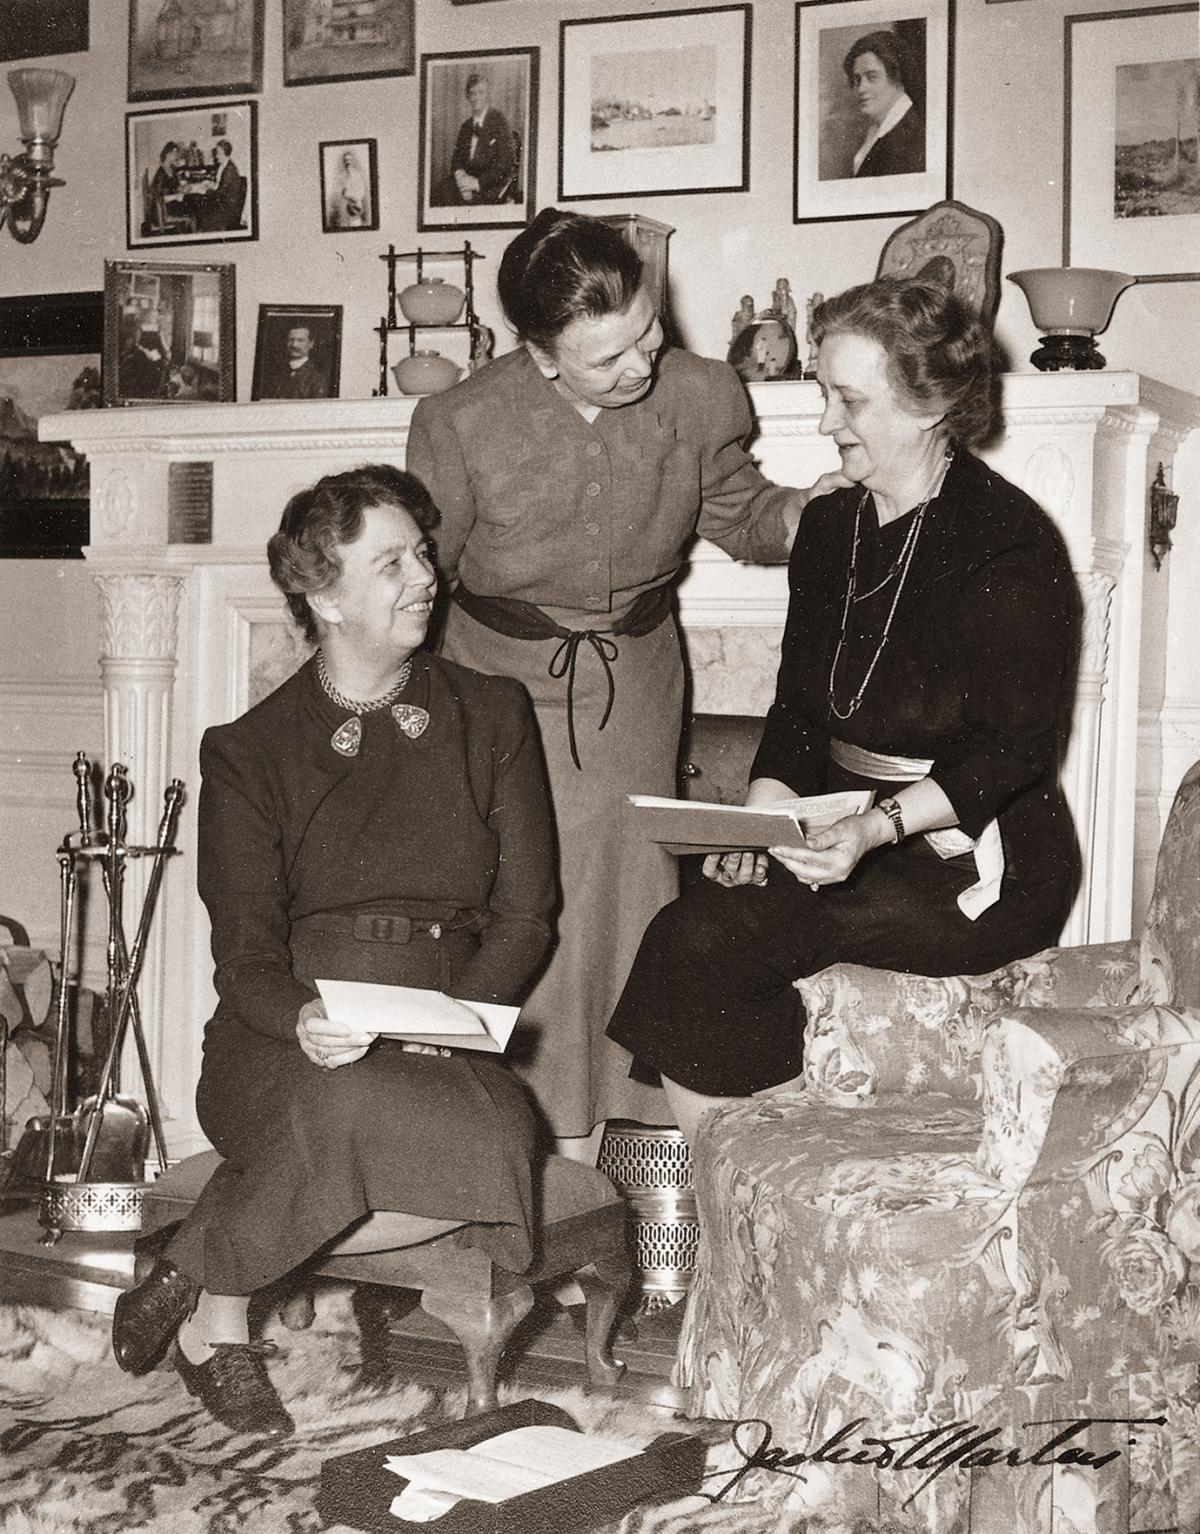 Three women in black and white photograph in the White House in the 1940s.